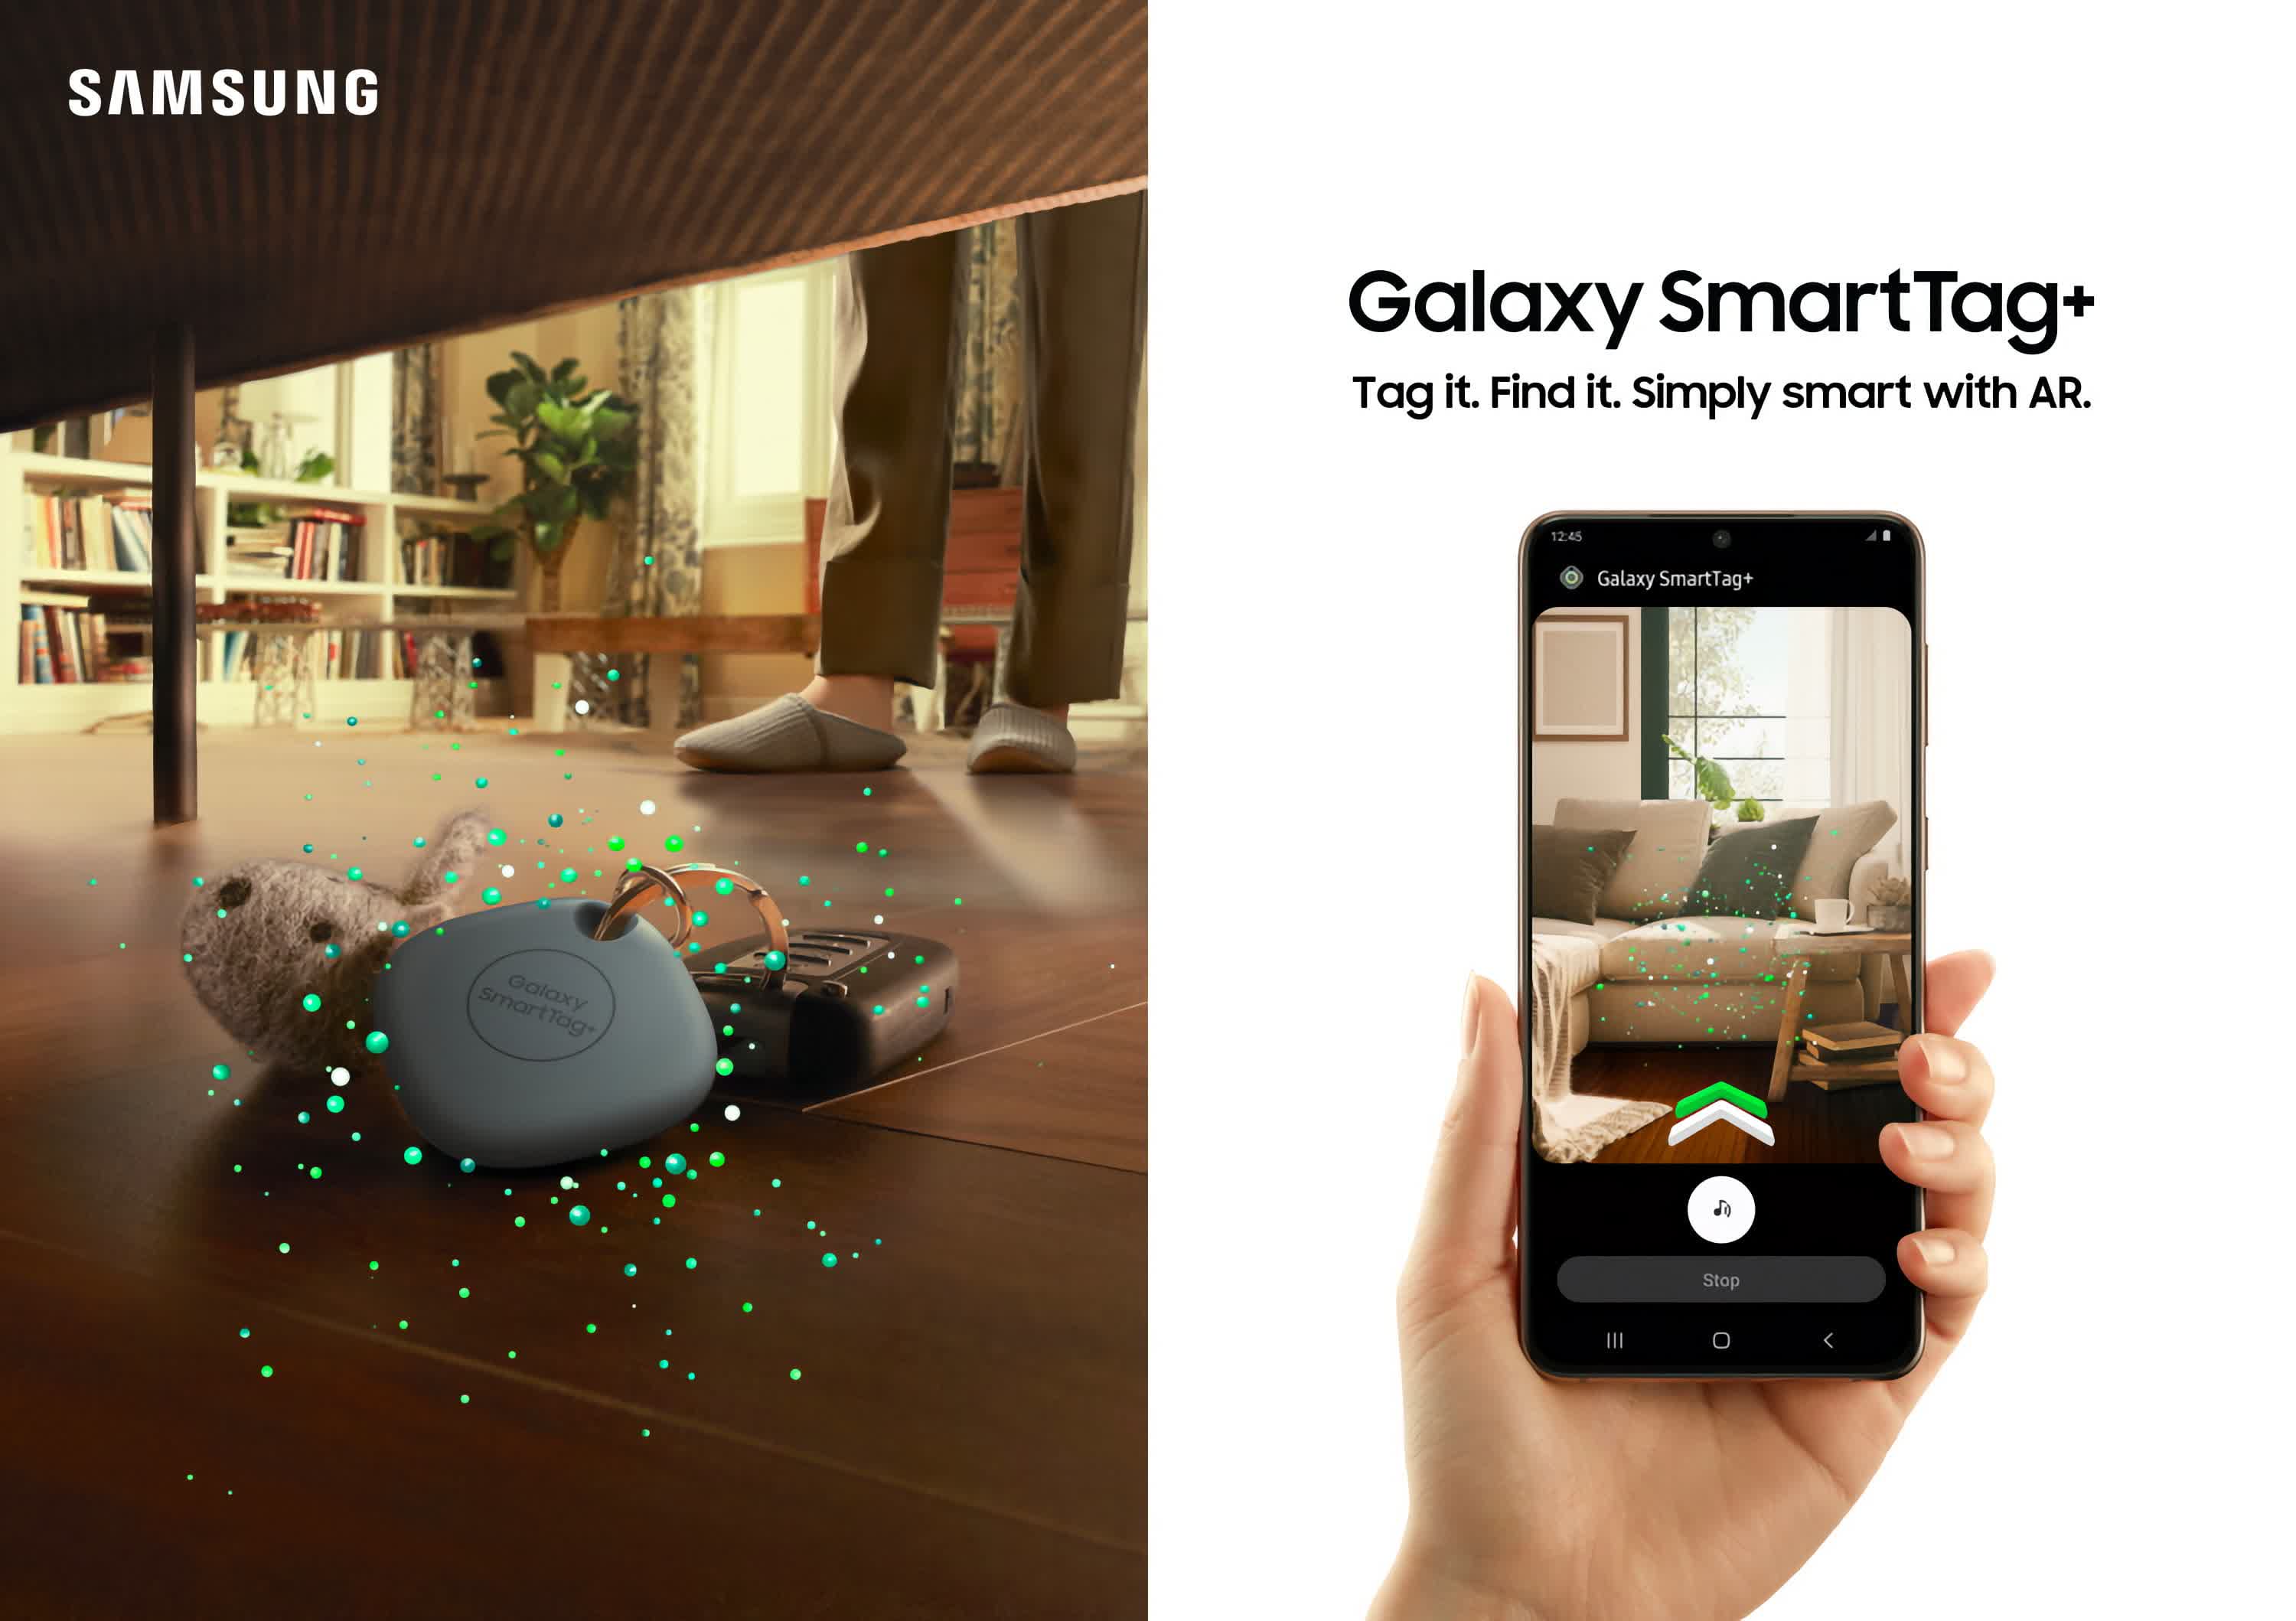 Samsung's Galaxy SmartTag+ is here with support for ultra-wideband and a $39.99 price tag